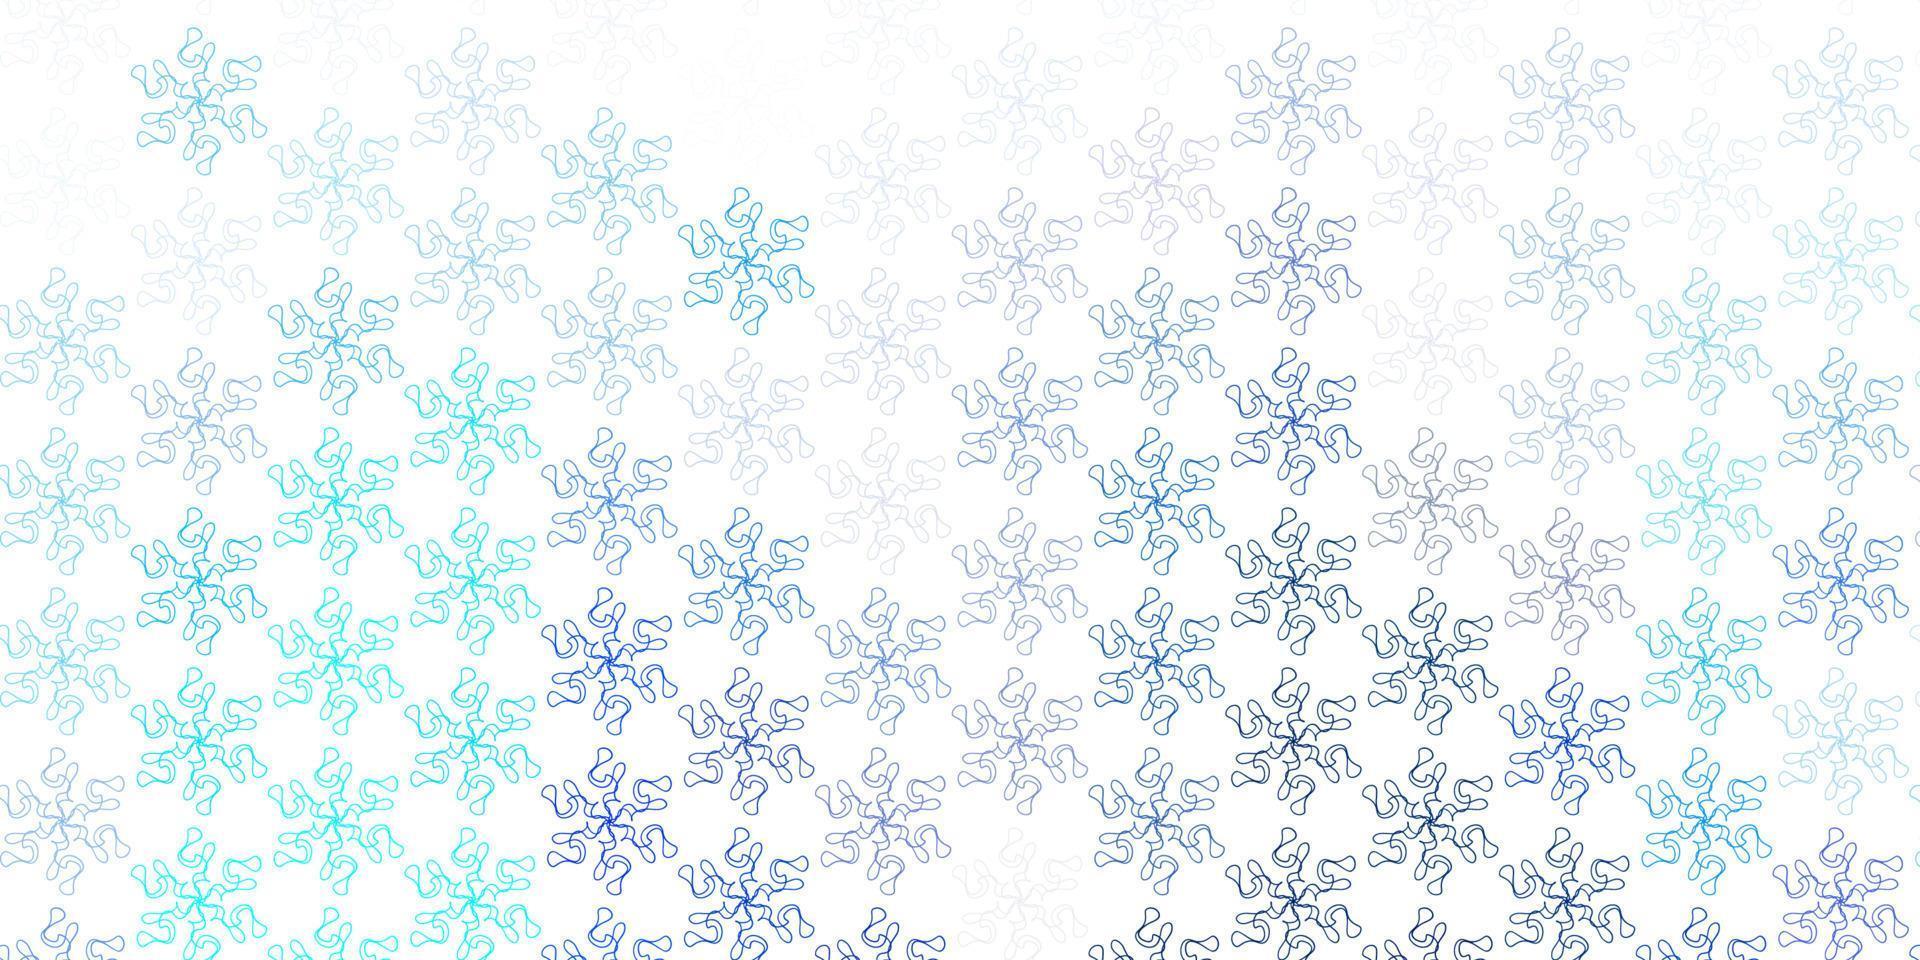 Light blue vector natural layout with flowers.